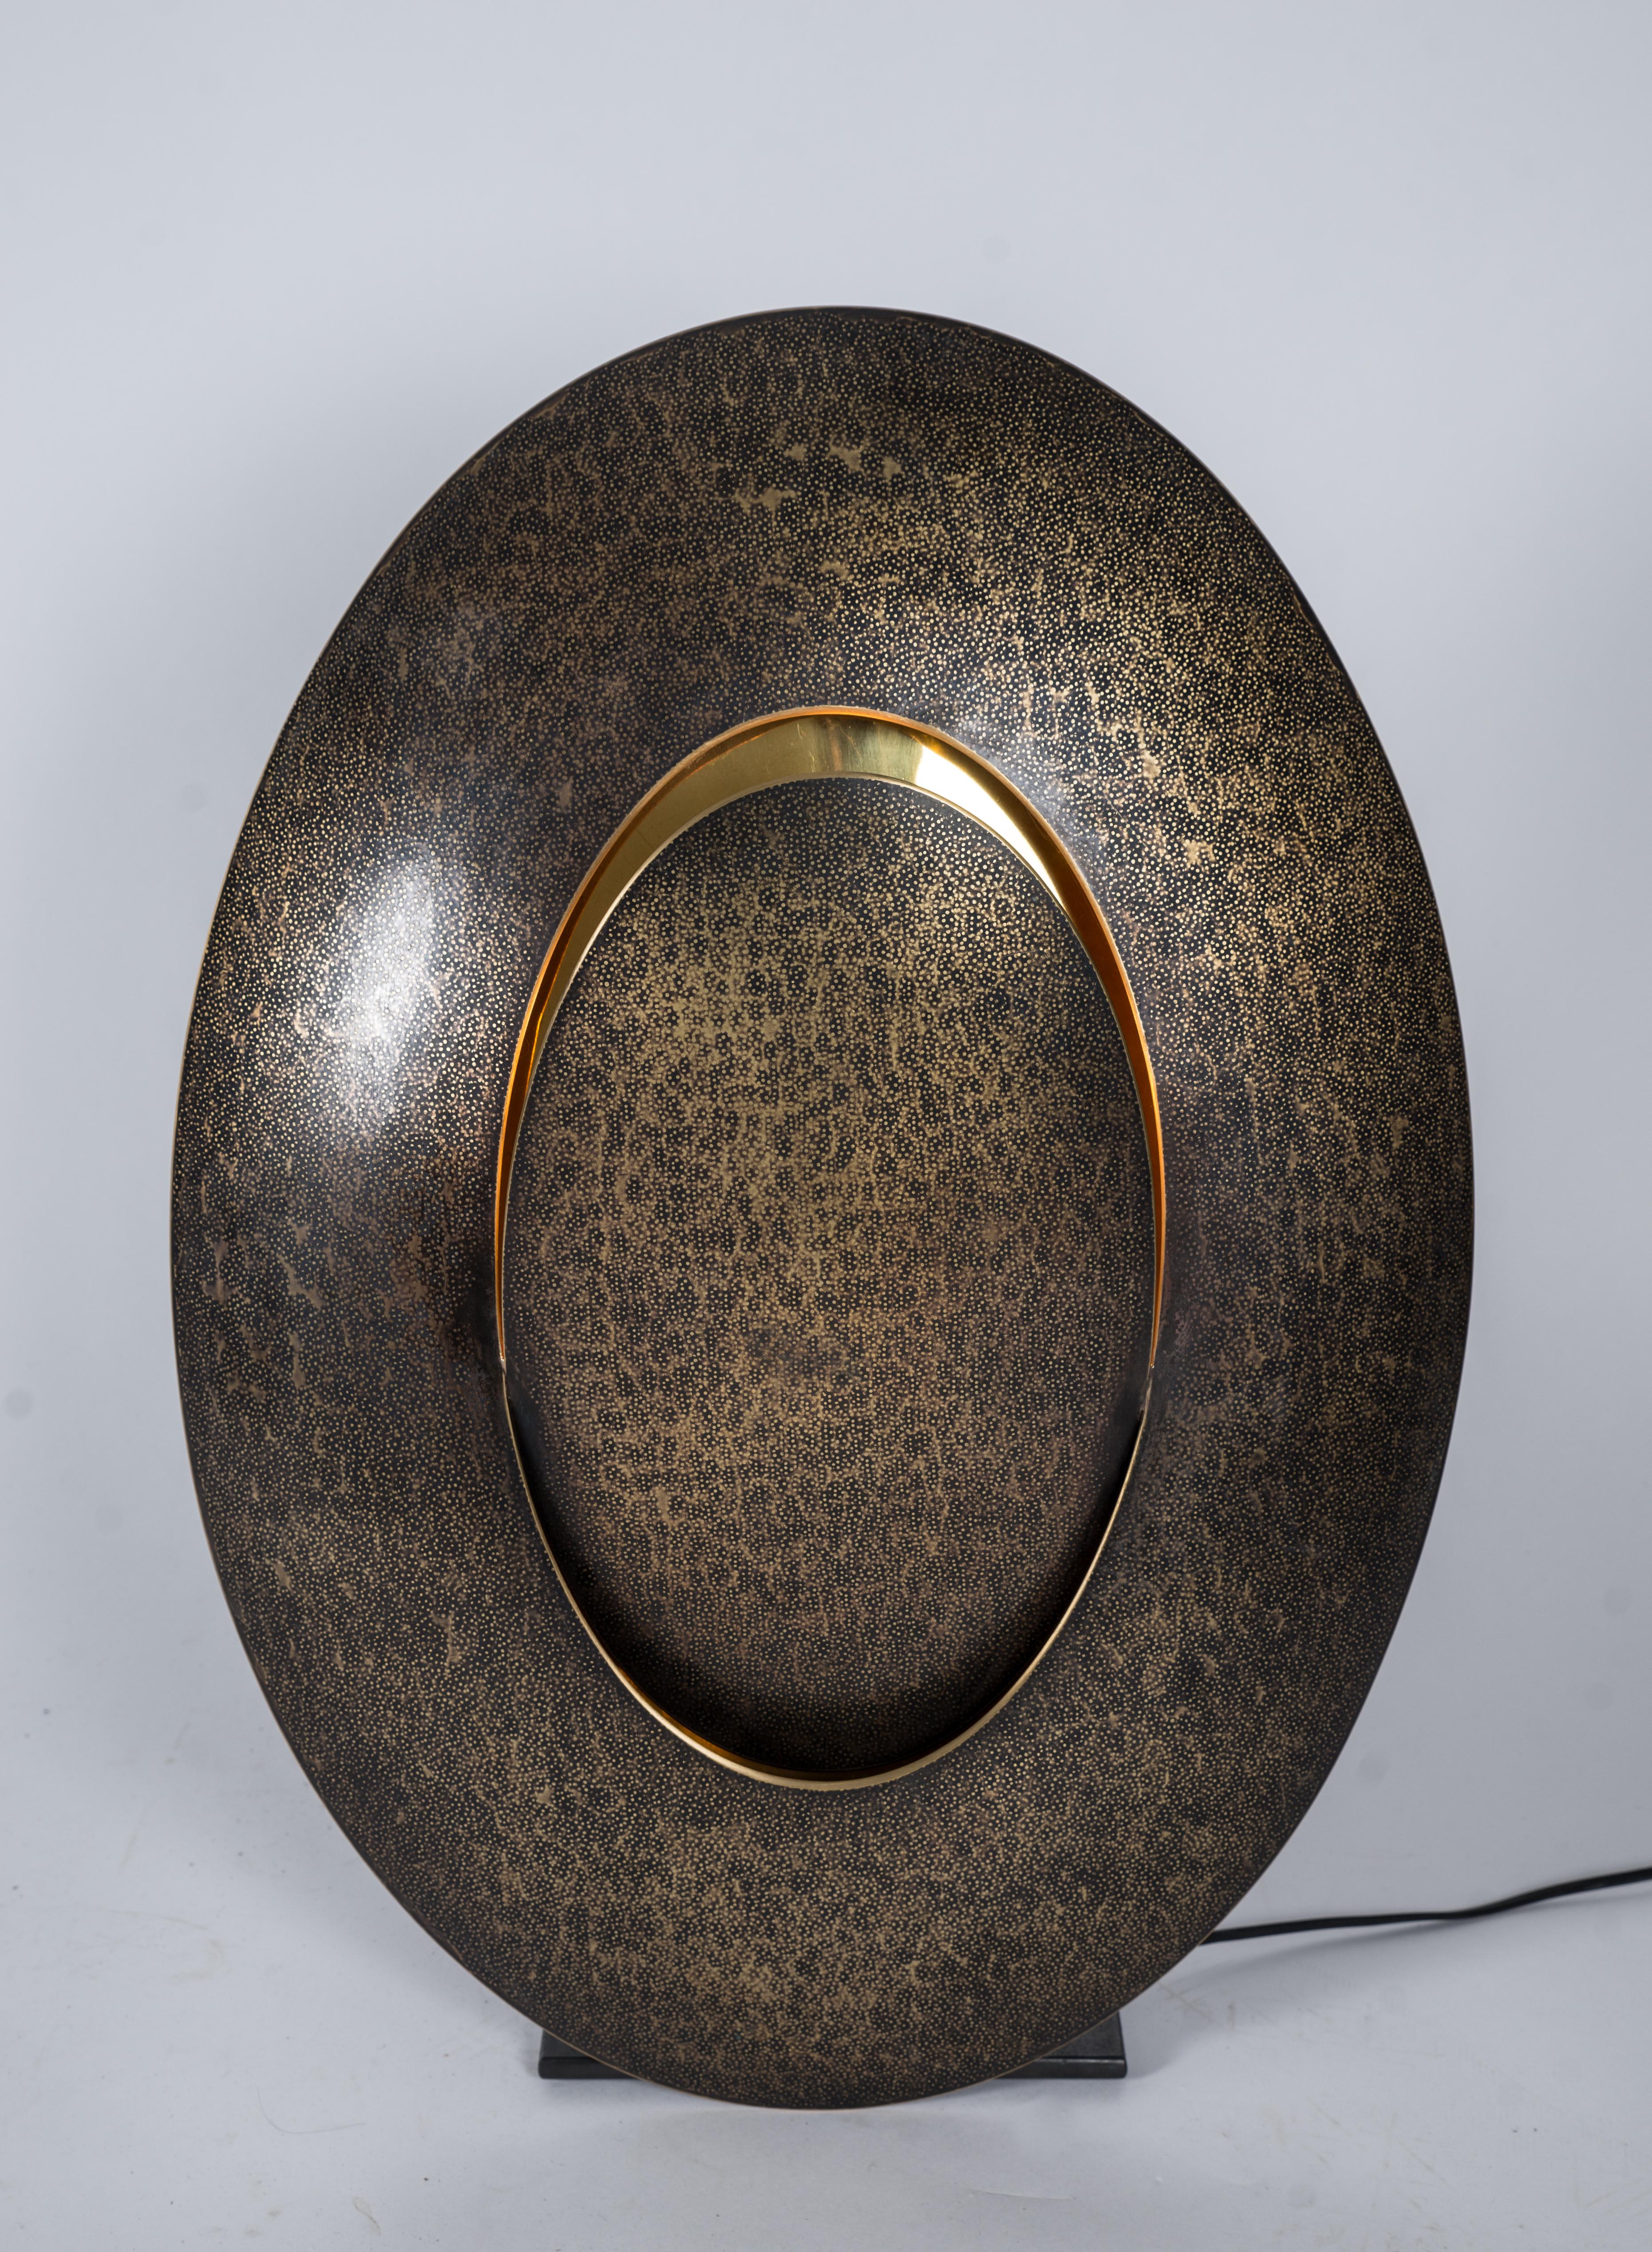 One large sconce, in polished brass, artist creation, France, Weigh: 8kg
About the artist:
Graduate in ceramic design and metal sculpture (2001,2003), he worked during two years with the sculptor Hervé Wahlen in his workshop .
Laureate of the